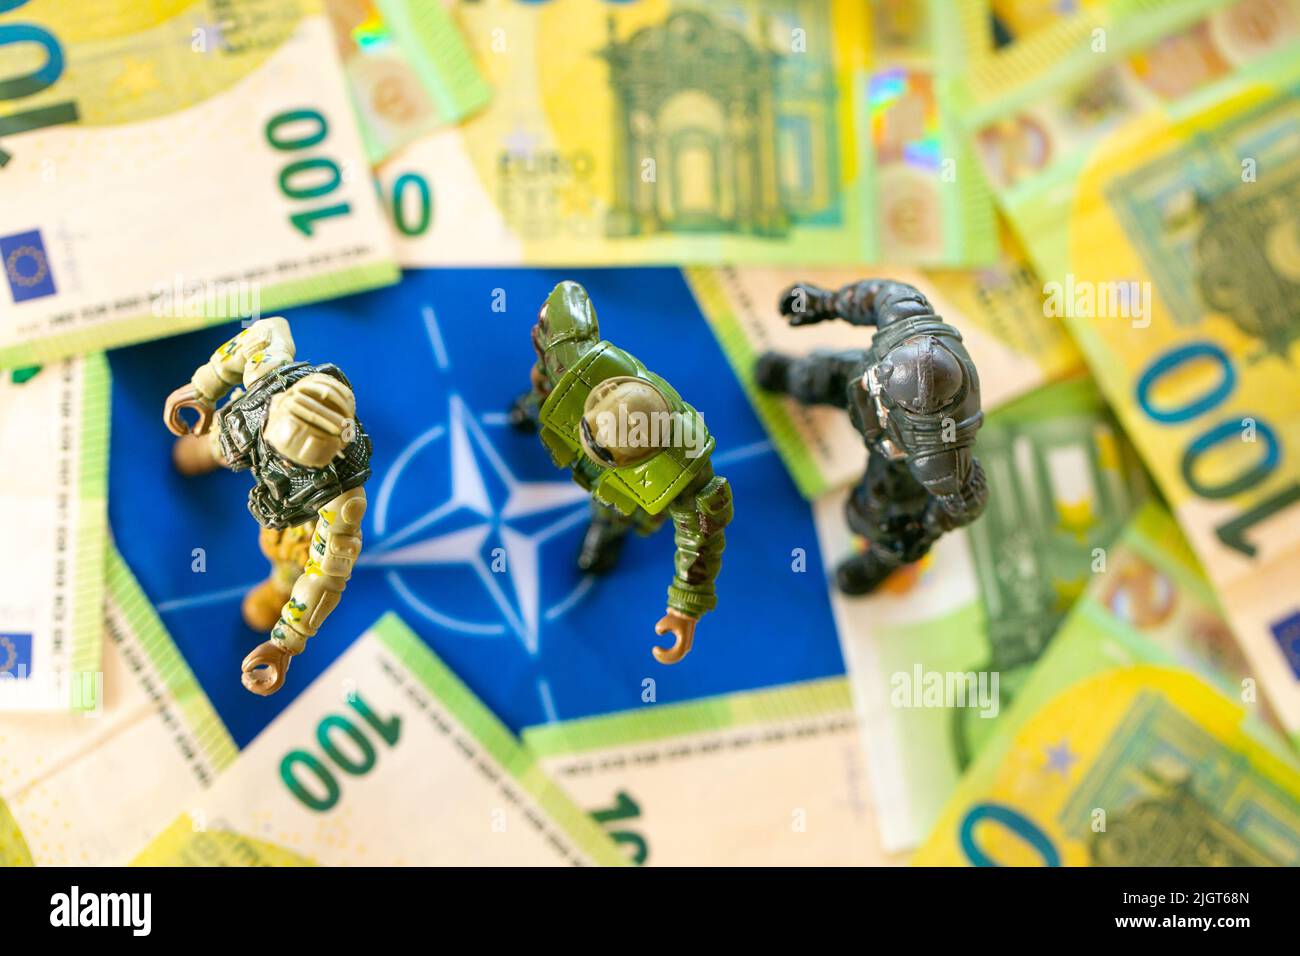 Military spending.Financing the supply of weapons, the army in Europe.Money for armaments and troops. firearms decorative and bills on the flag of the Stock Photo